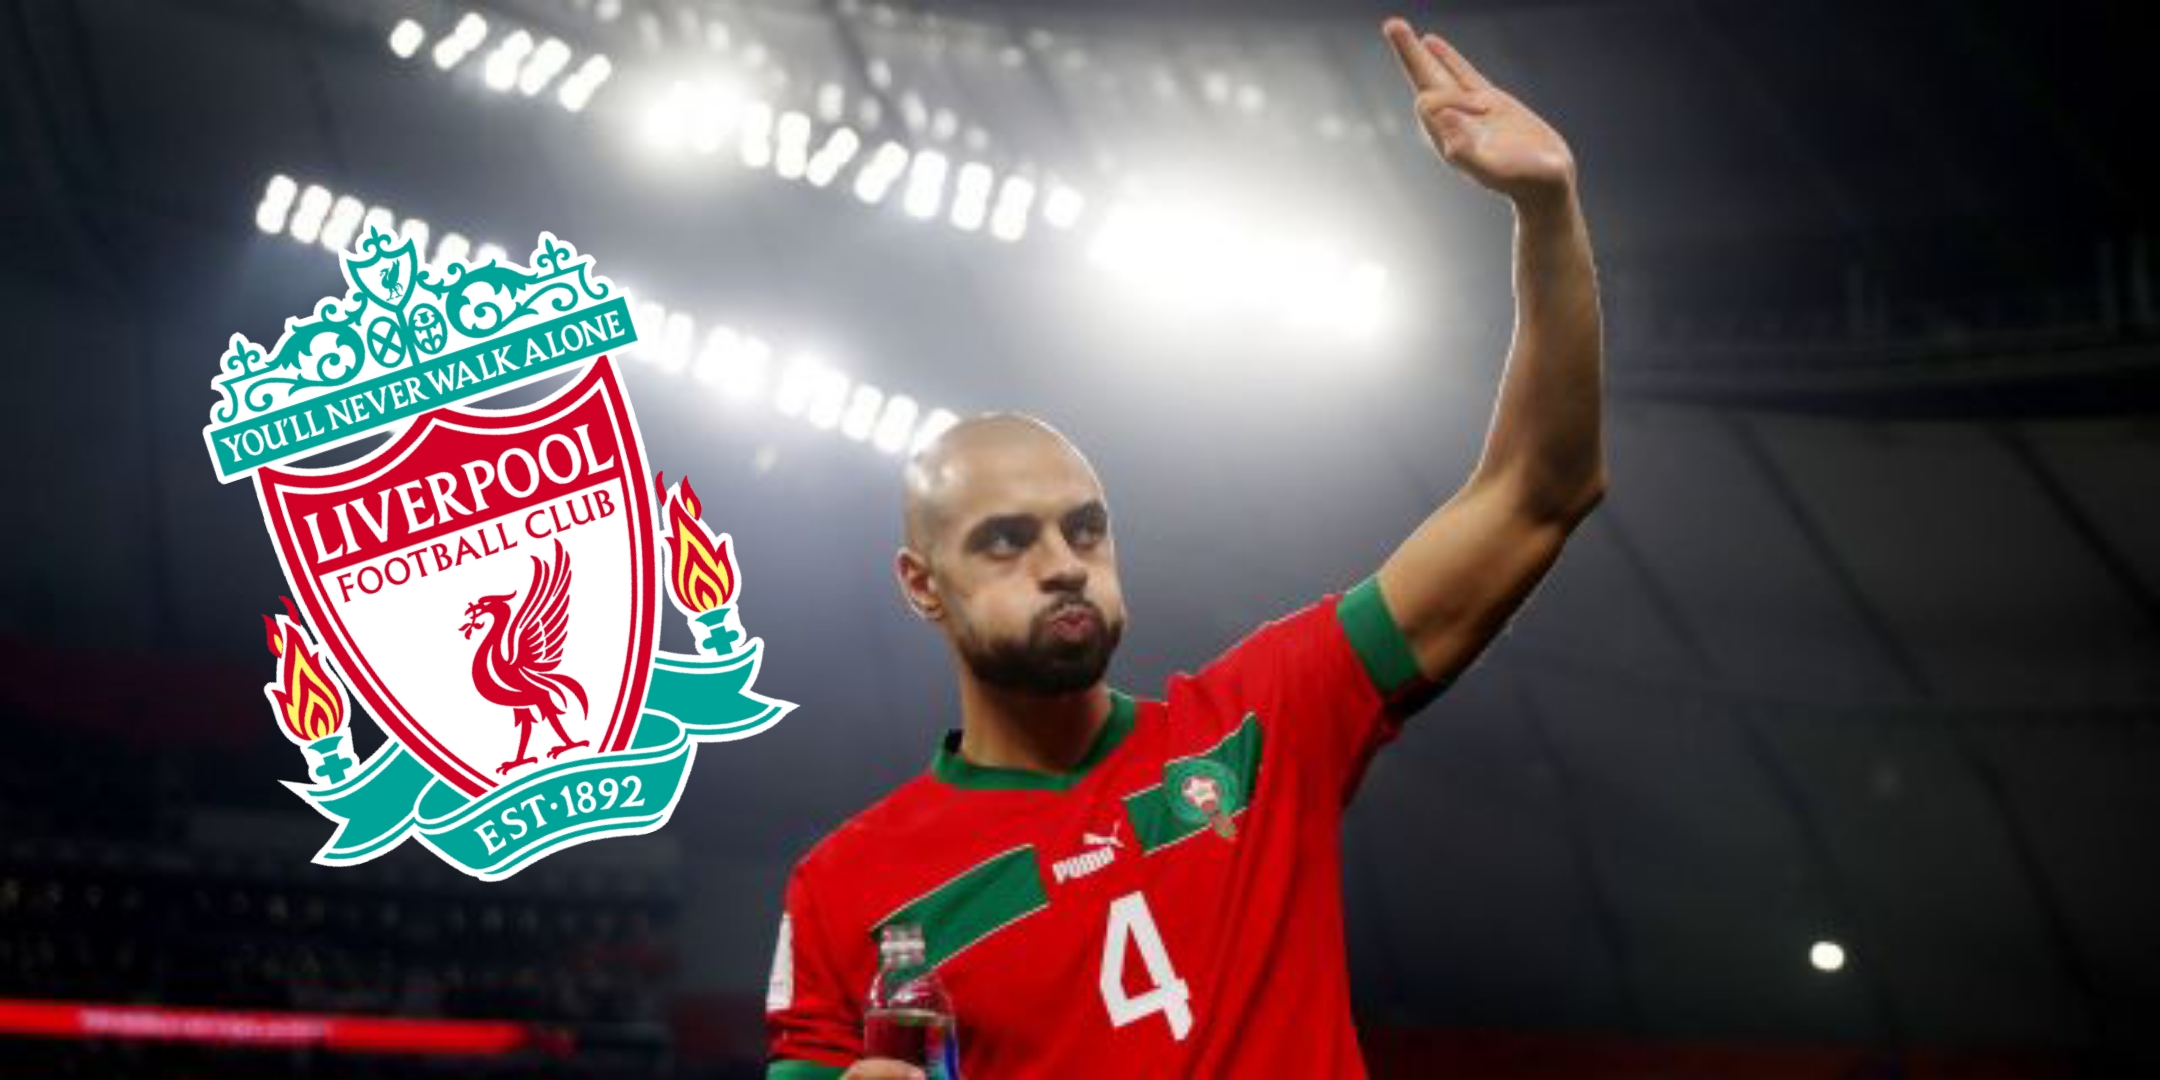 "I want to play for Liverpool" - Sofyan Amrabat ‘prefers Liverpool’ as ‘new transfer details emerges’ 1 Sportelo